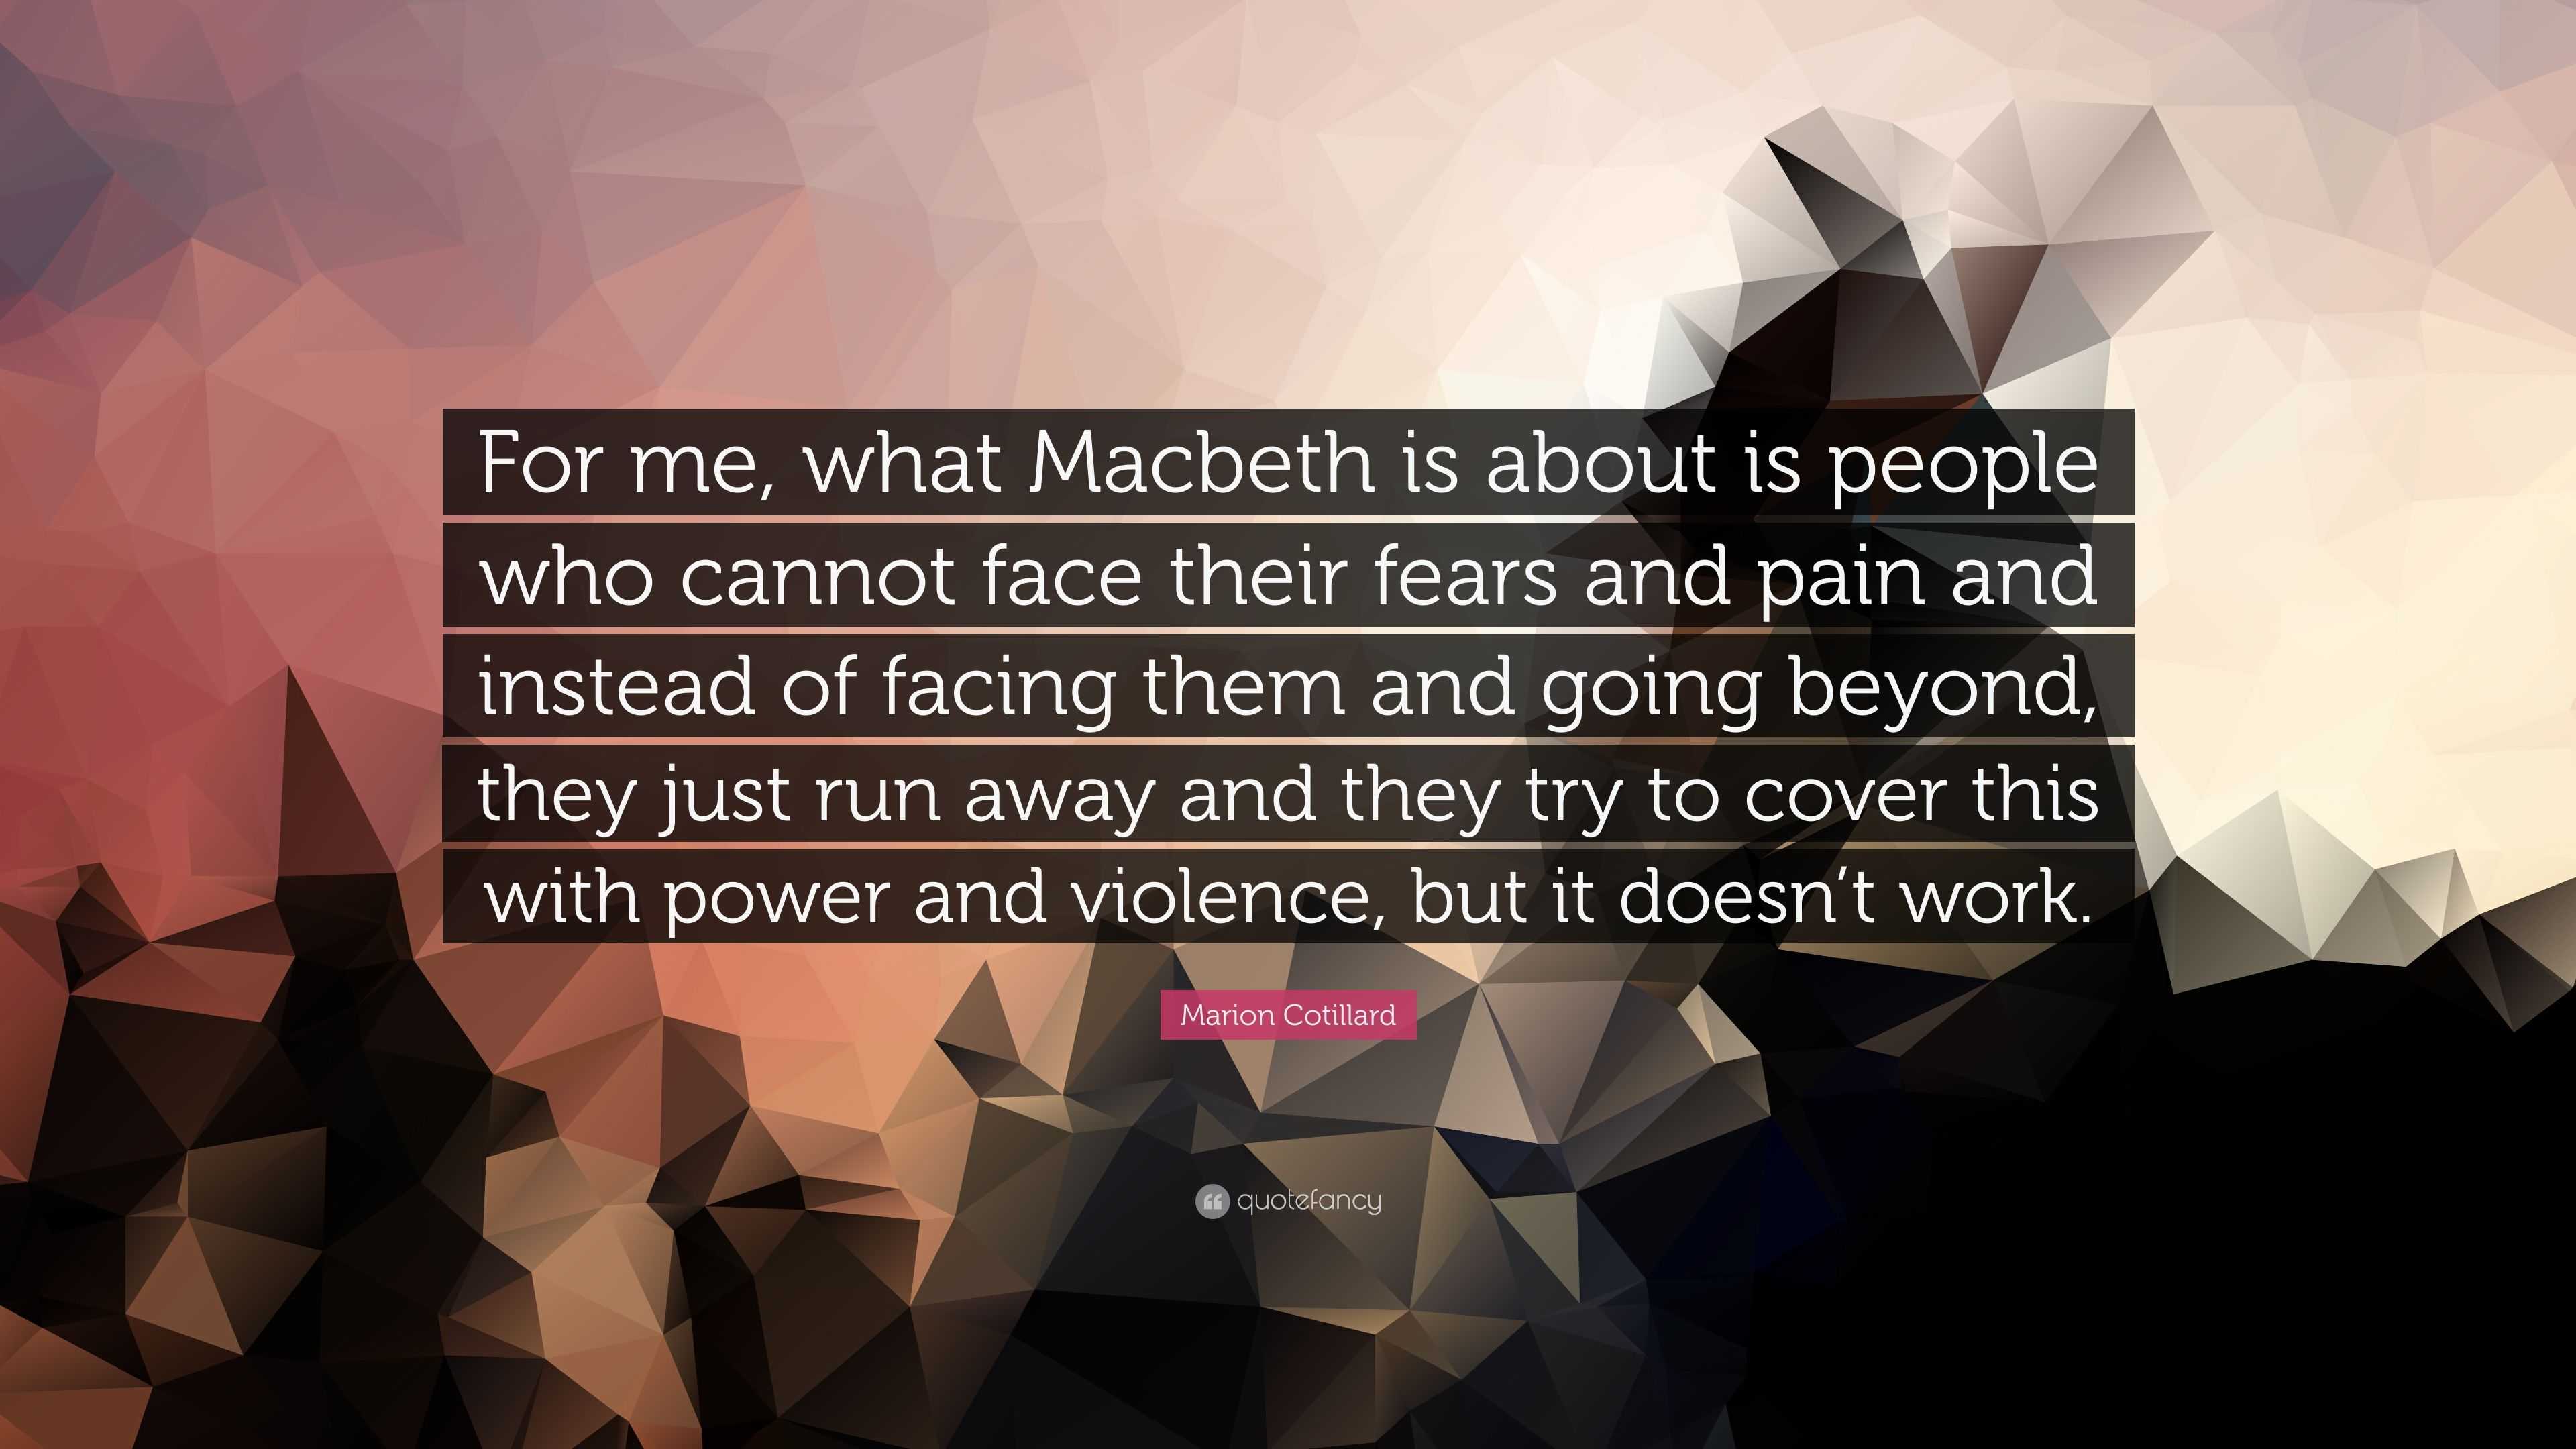 macbeth quotes about power